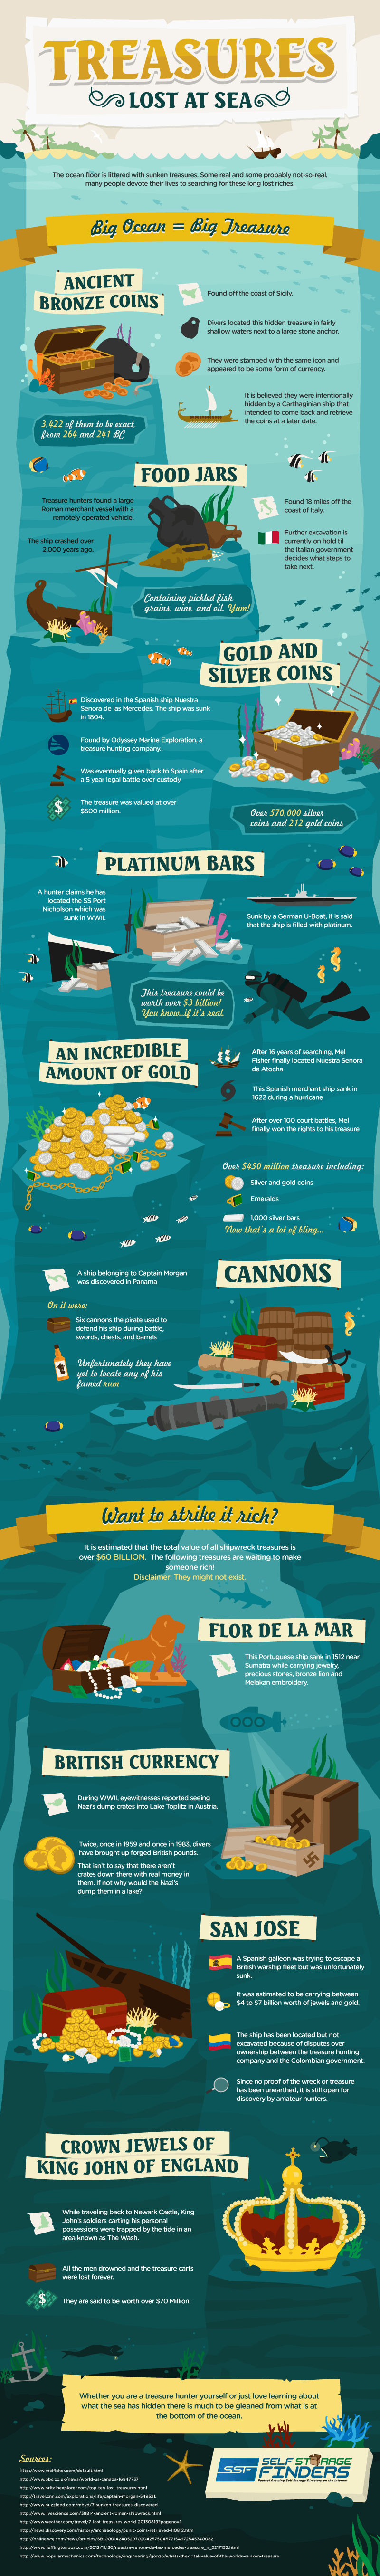 Treasures Lost at Sea Infographic